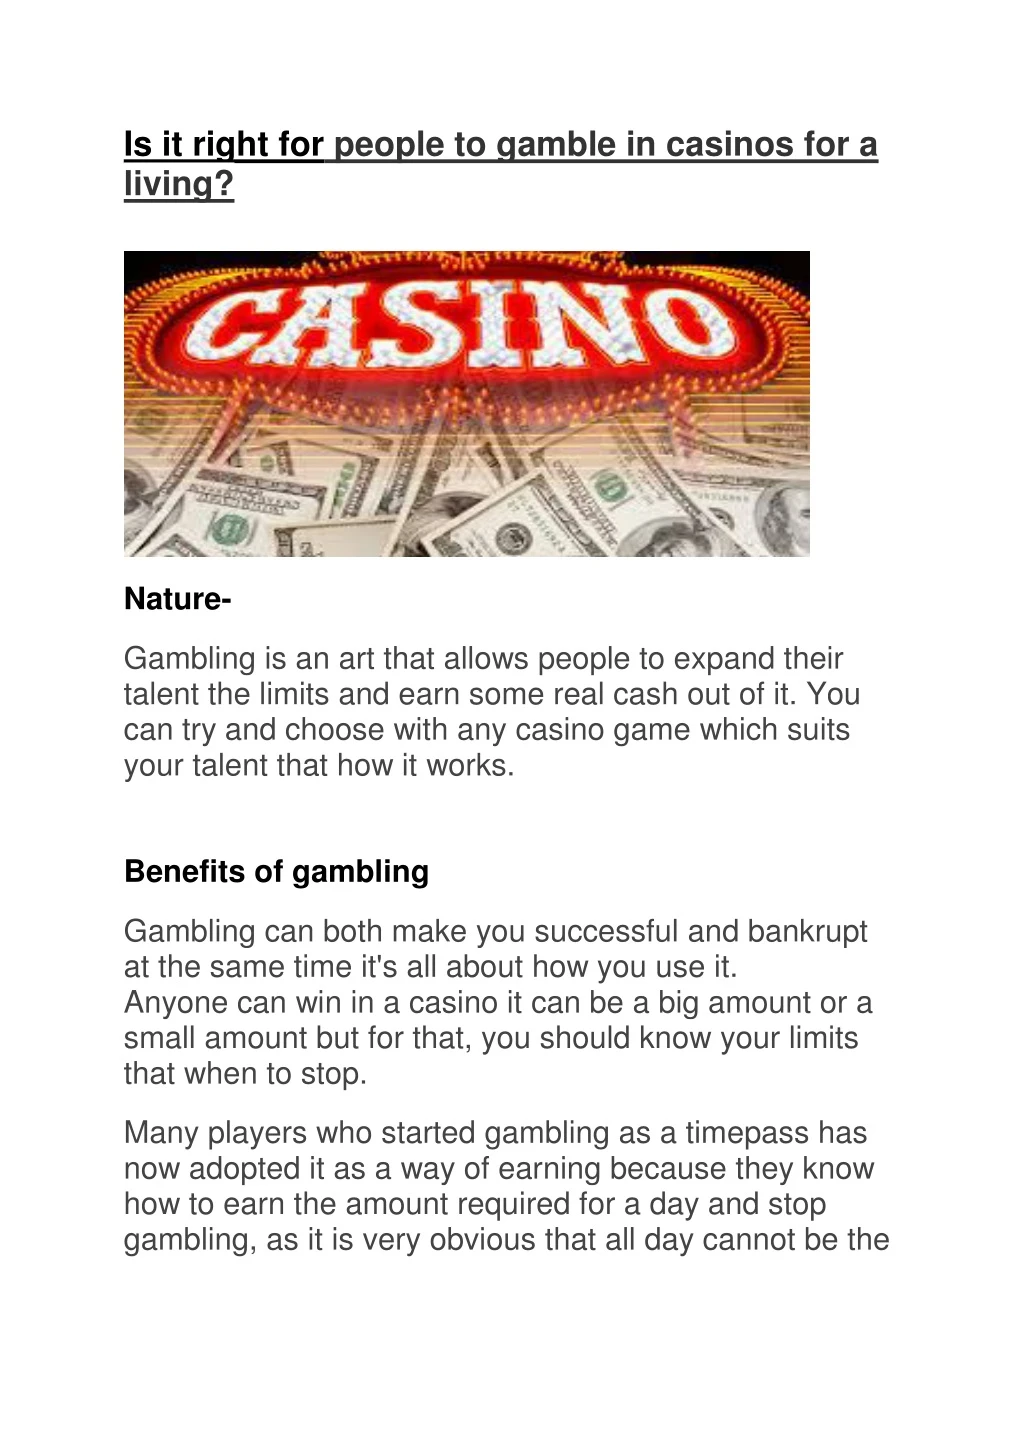 is it right for people to gamble in casinos